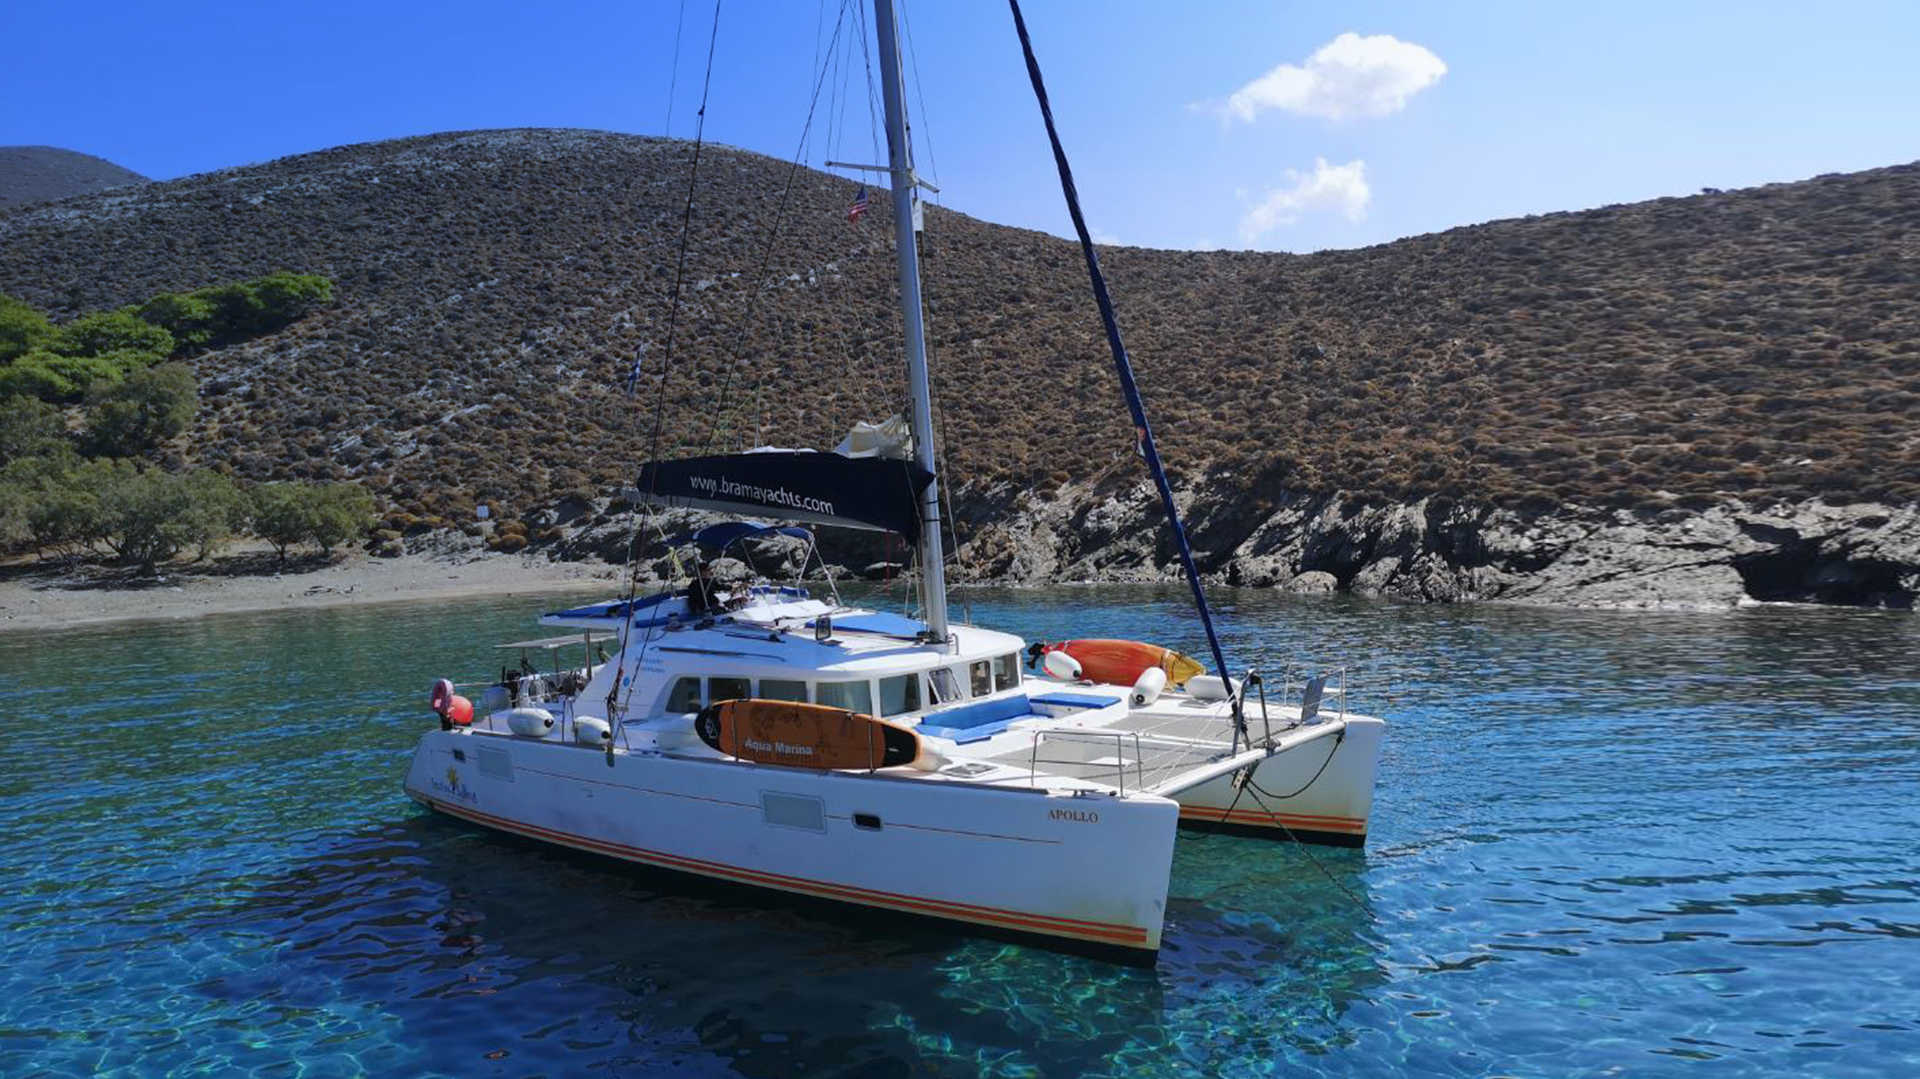   	 	  		Bareboat Charter 		 		 Just sail away! 		 	   	 		 		ask for inquiry 	 	  	 			 		 		 			 		7 daysmin 		 		  		 		 		 			 		max12 persons 		 		   		 		 		 			 		€ 950per day 		 		    	 	  